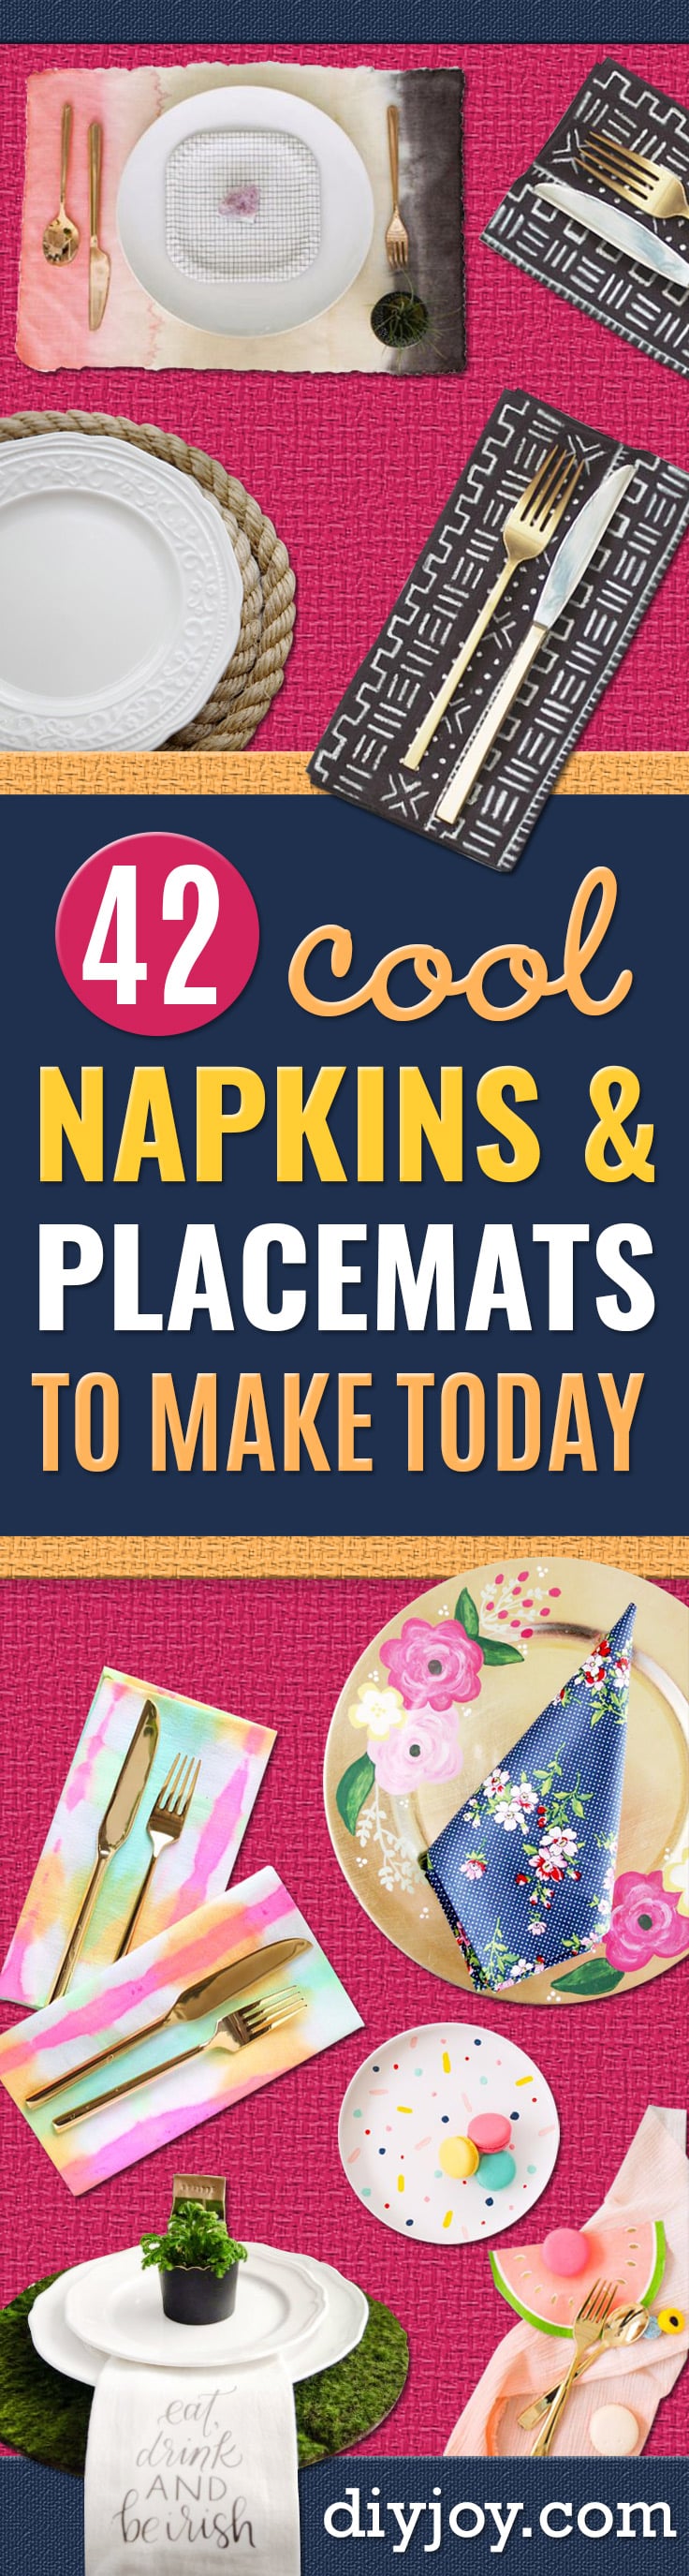 DIY Napkins and Placemats - Easy Sewing Projects, Cute No Sew Ideas and Creative Ways To Make a Napkin or Placemat - Quick DIY Gift Ideas for Friends, Family and Awesome Home Decor - Cheap Do It Yourself Kitchen Decor - Simple Wedding Gifts You Can Make On A Budget